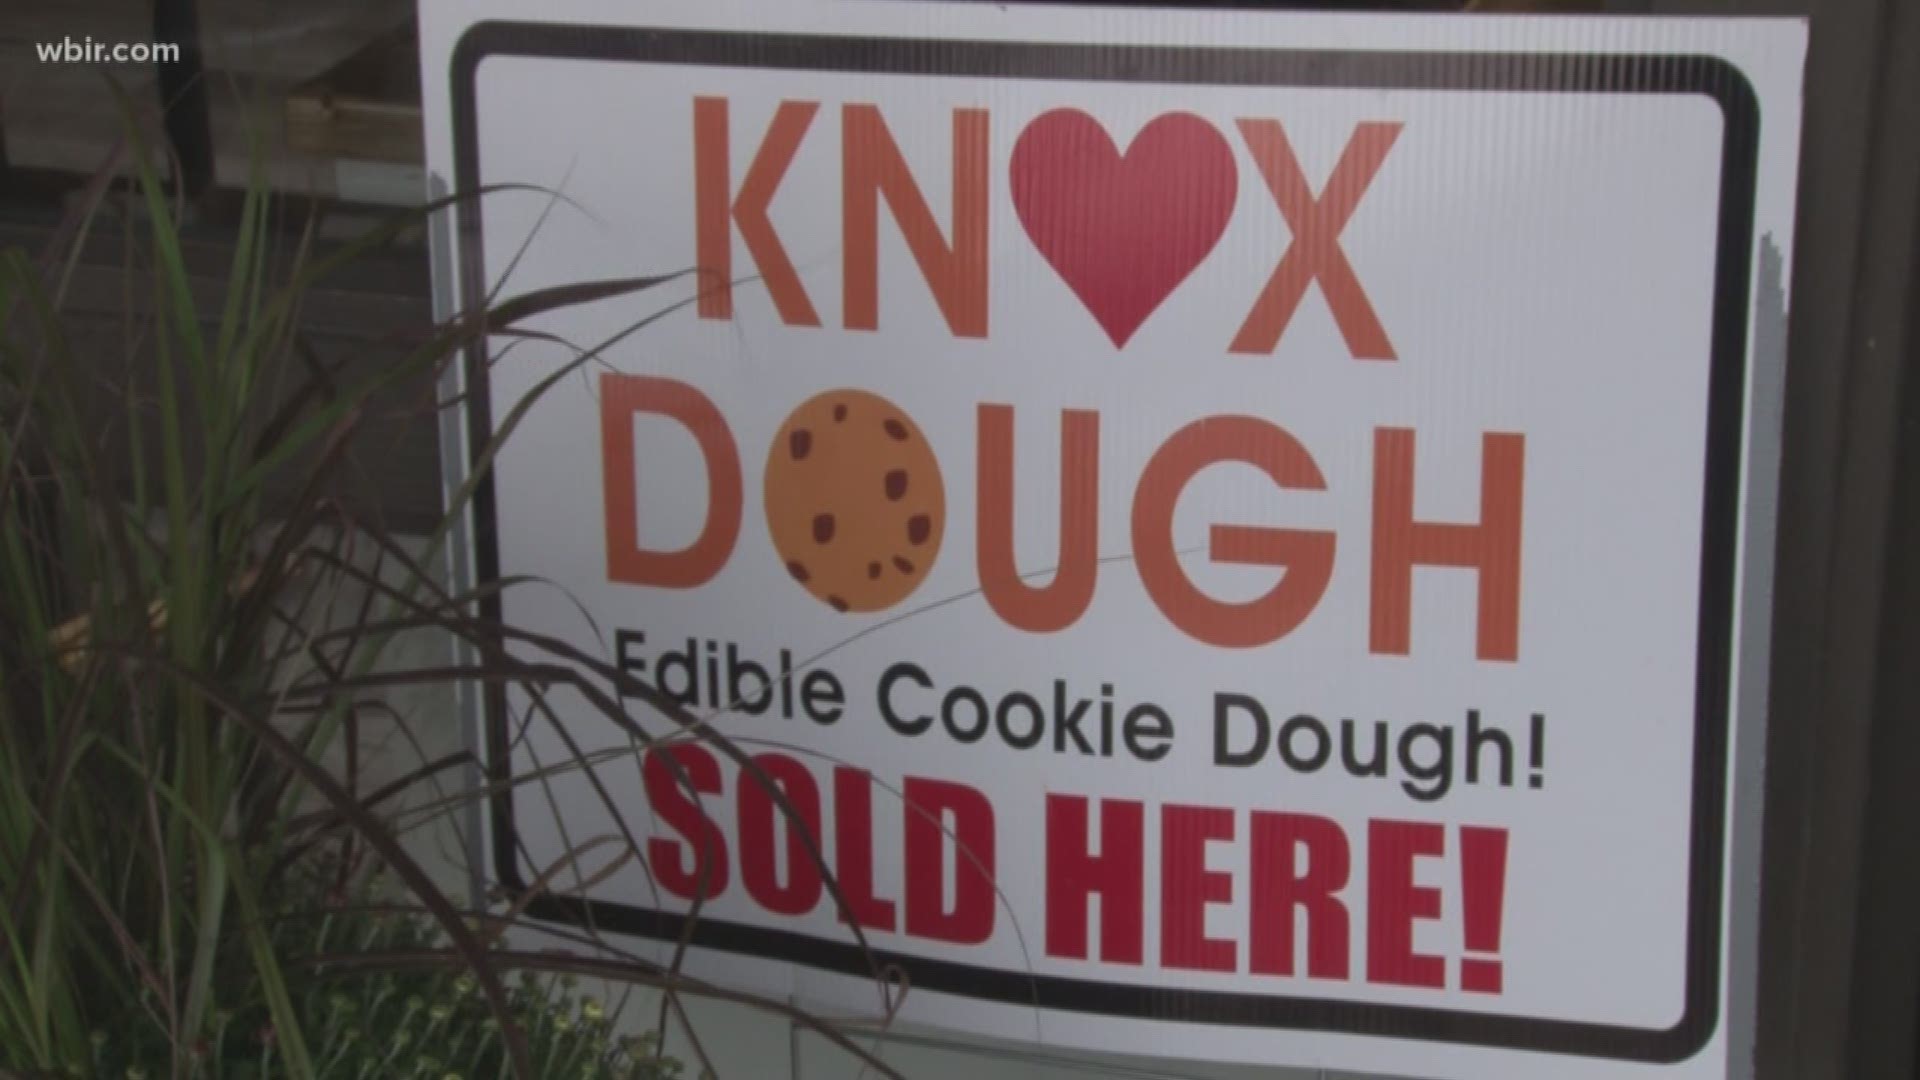 Knox Dough opens its dough shop on Kingston pike in west knoxville this evening.